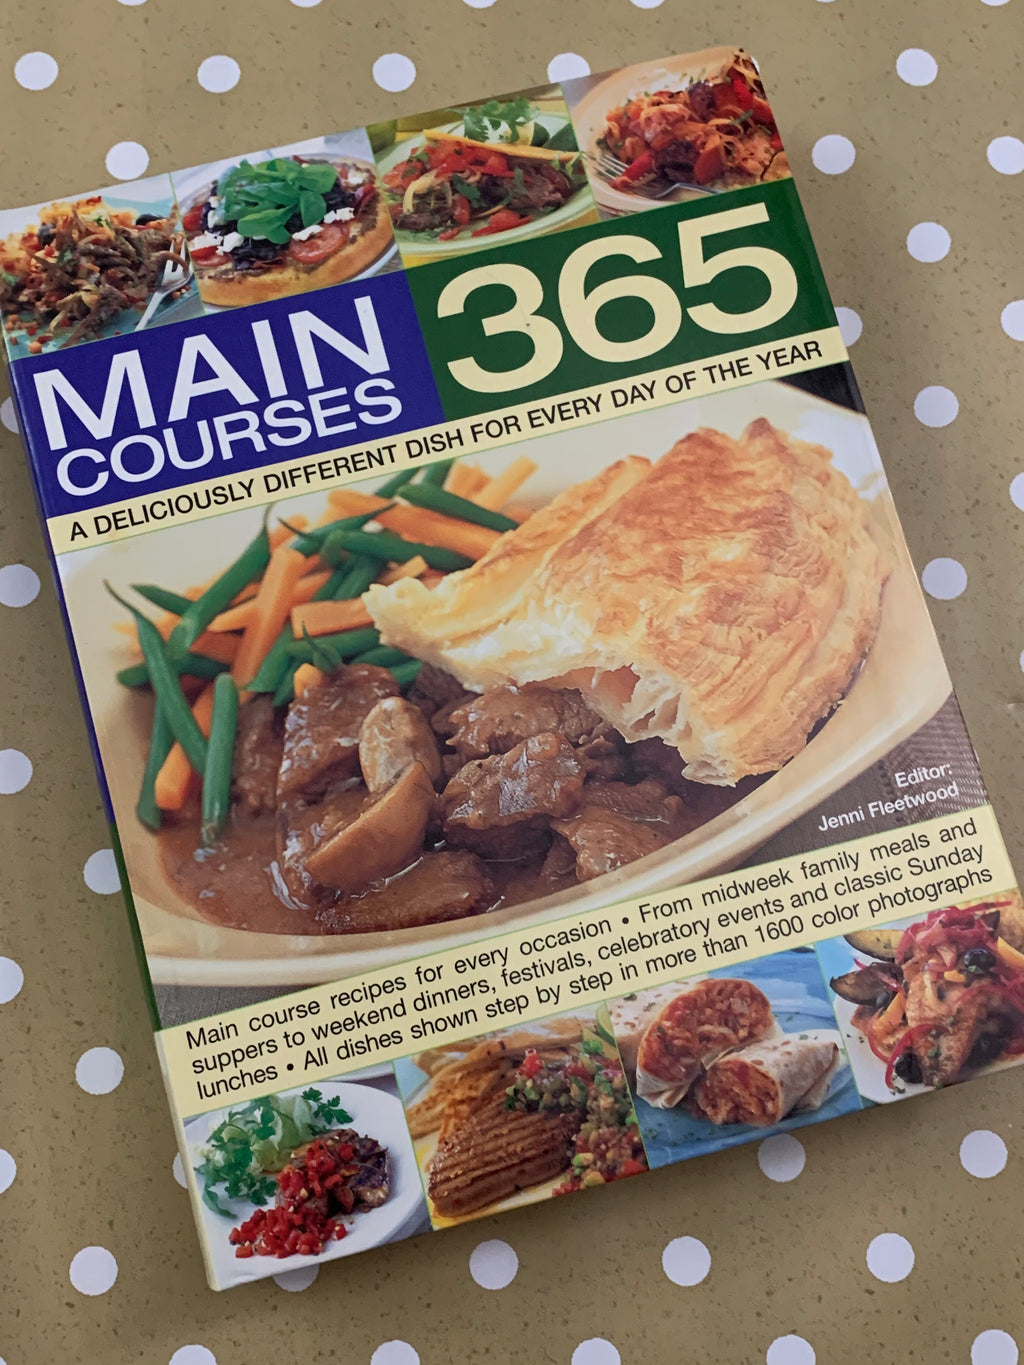 Main Courses 365: A Delicious Different Dish for Every Day of the Year